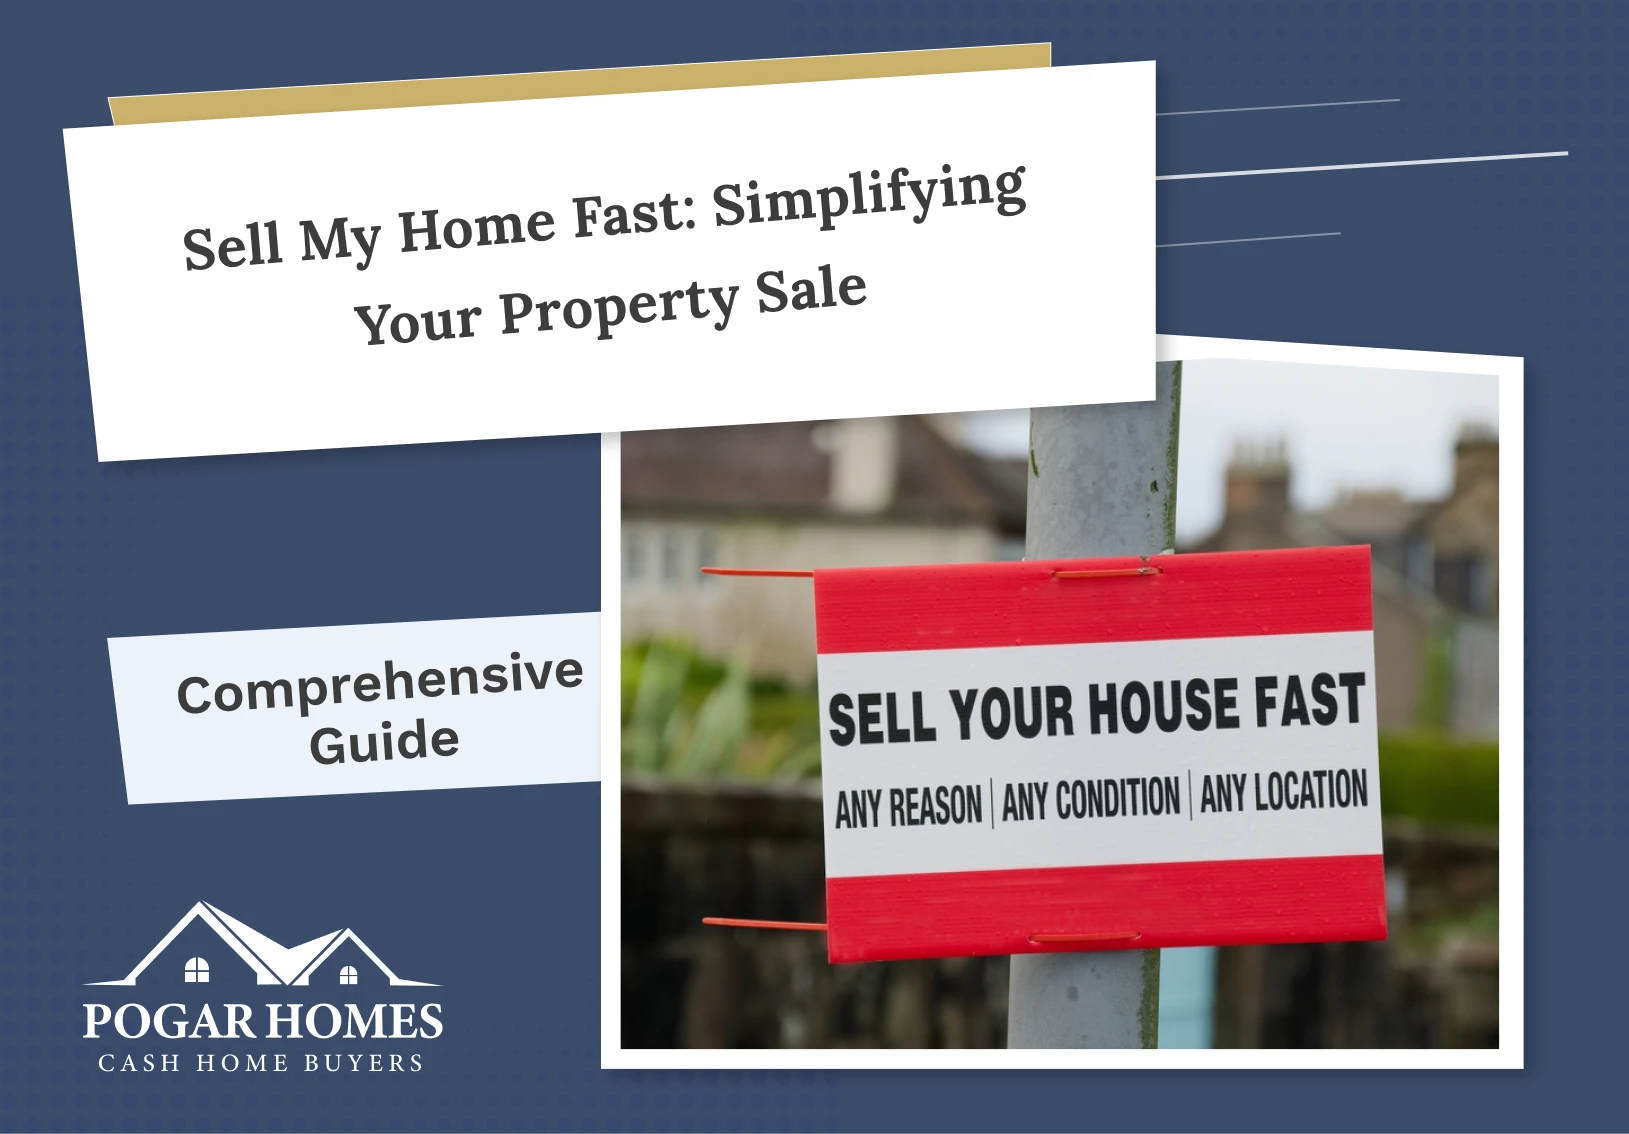 Sell My Home Fast: Simplifying Your Property Sale 